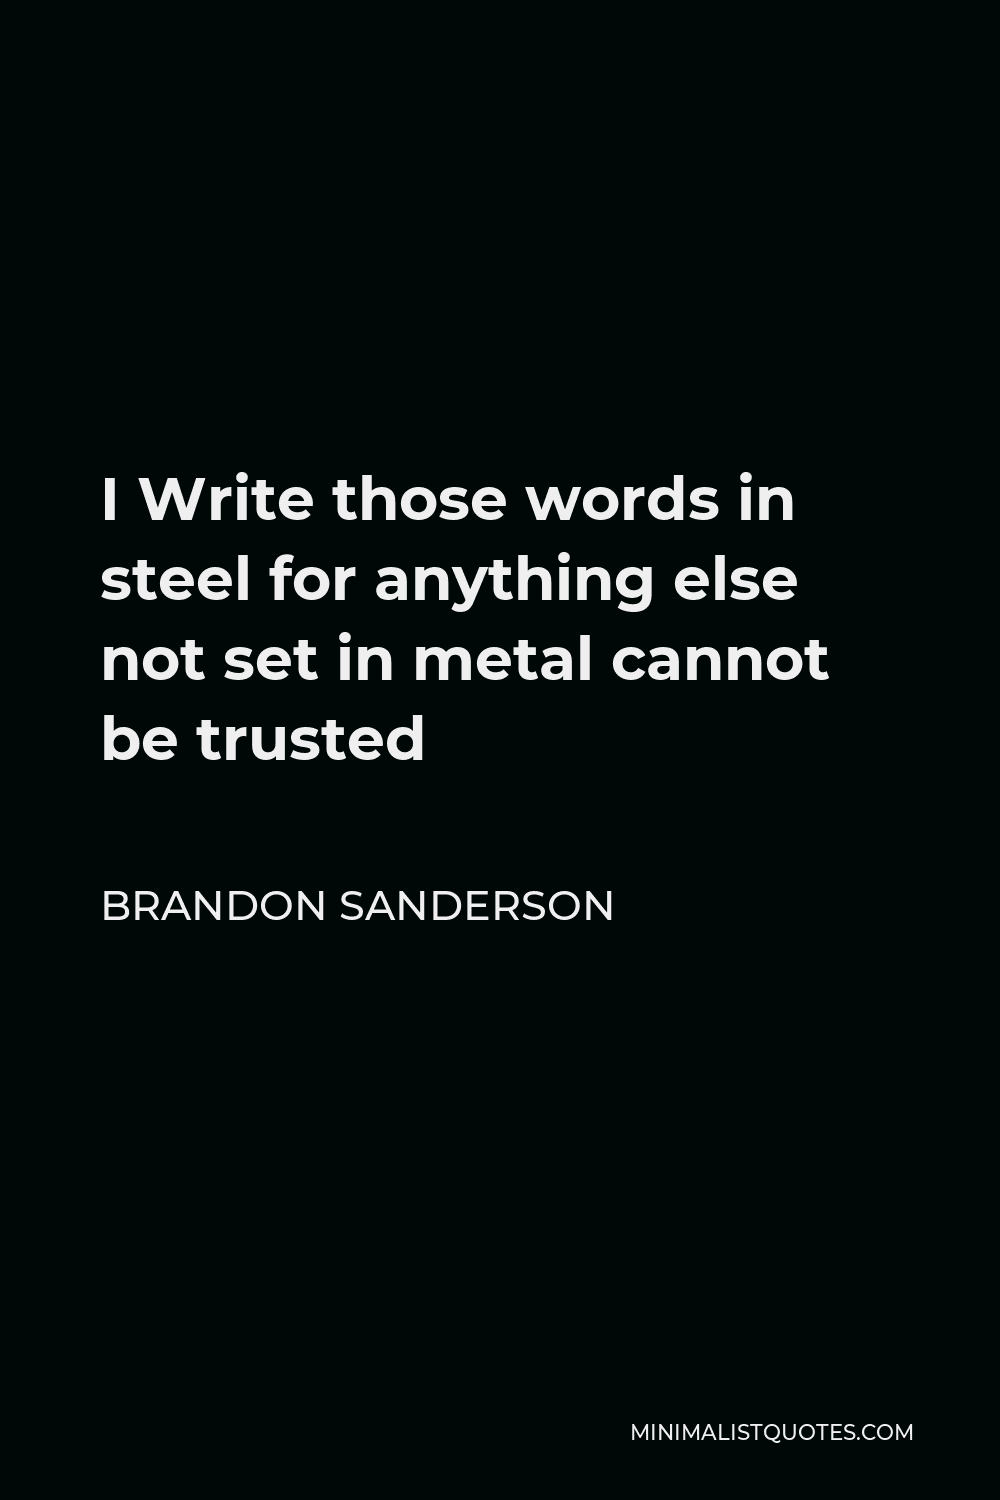 Brandon Sanderson Quote - I Write those words in steel for anything else not set in metal cannot be trusted